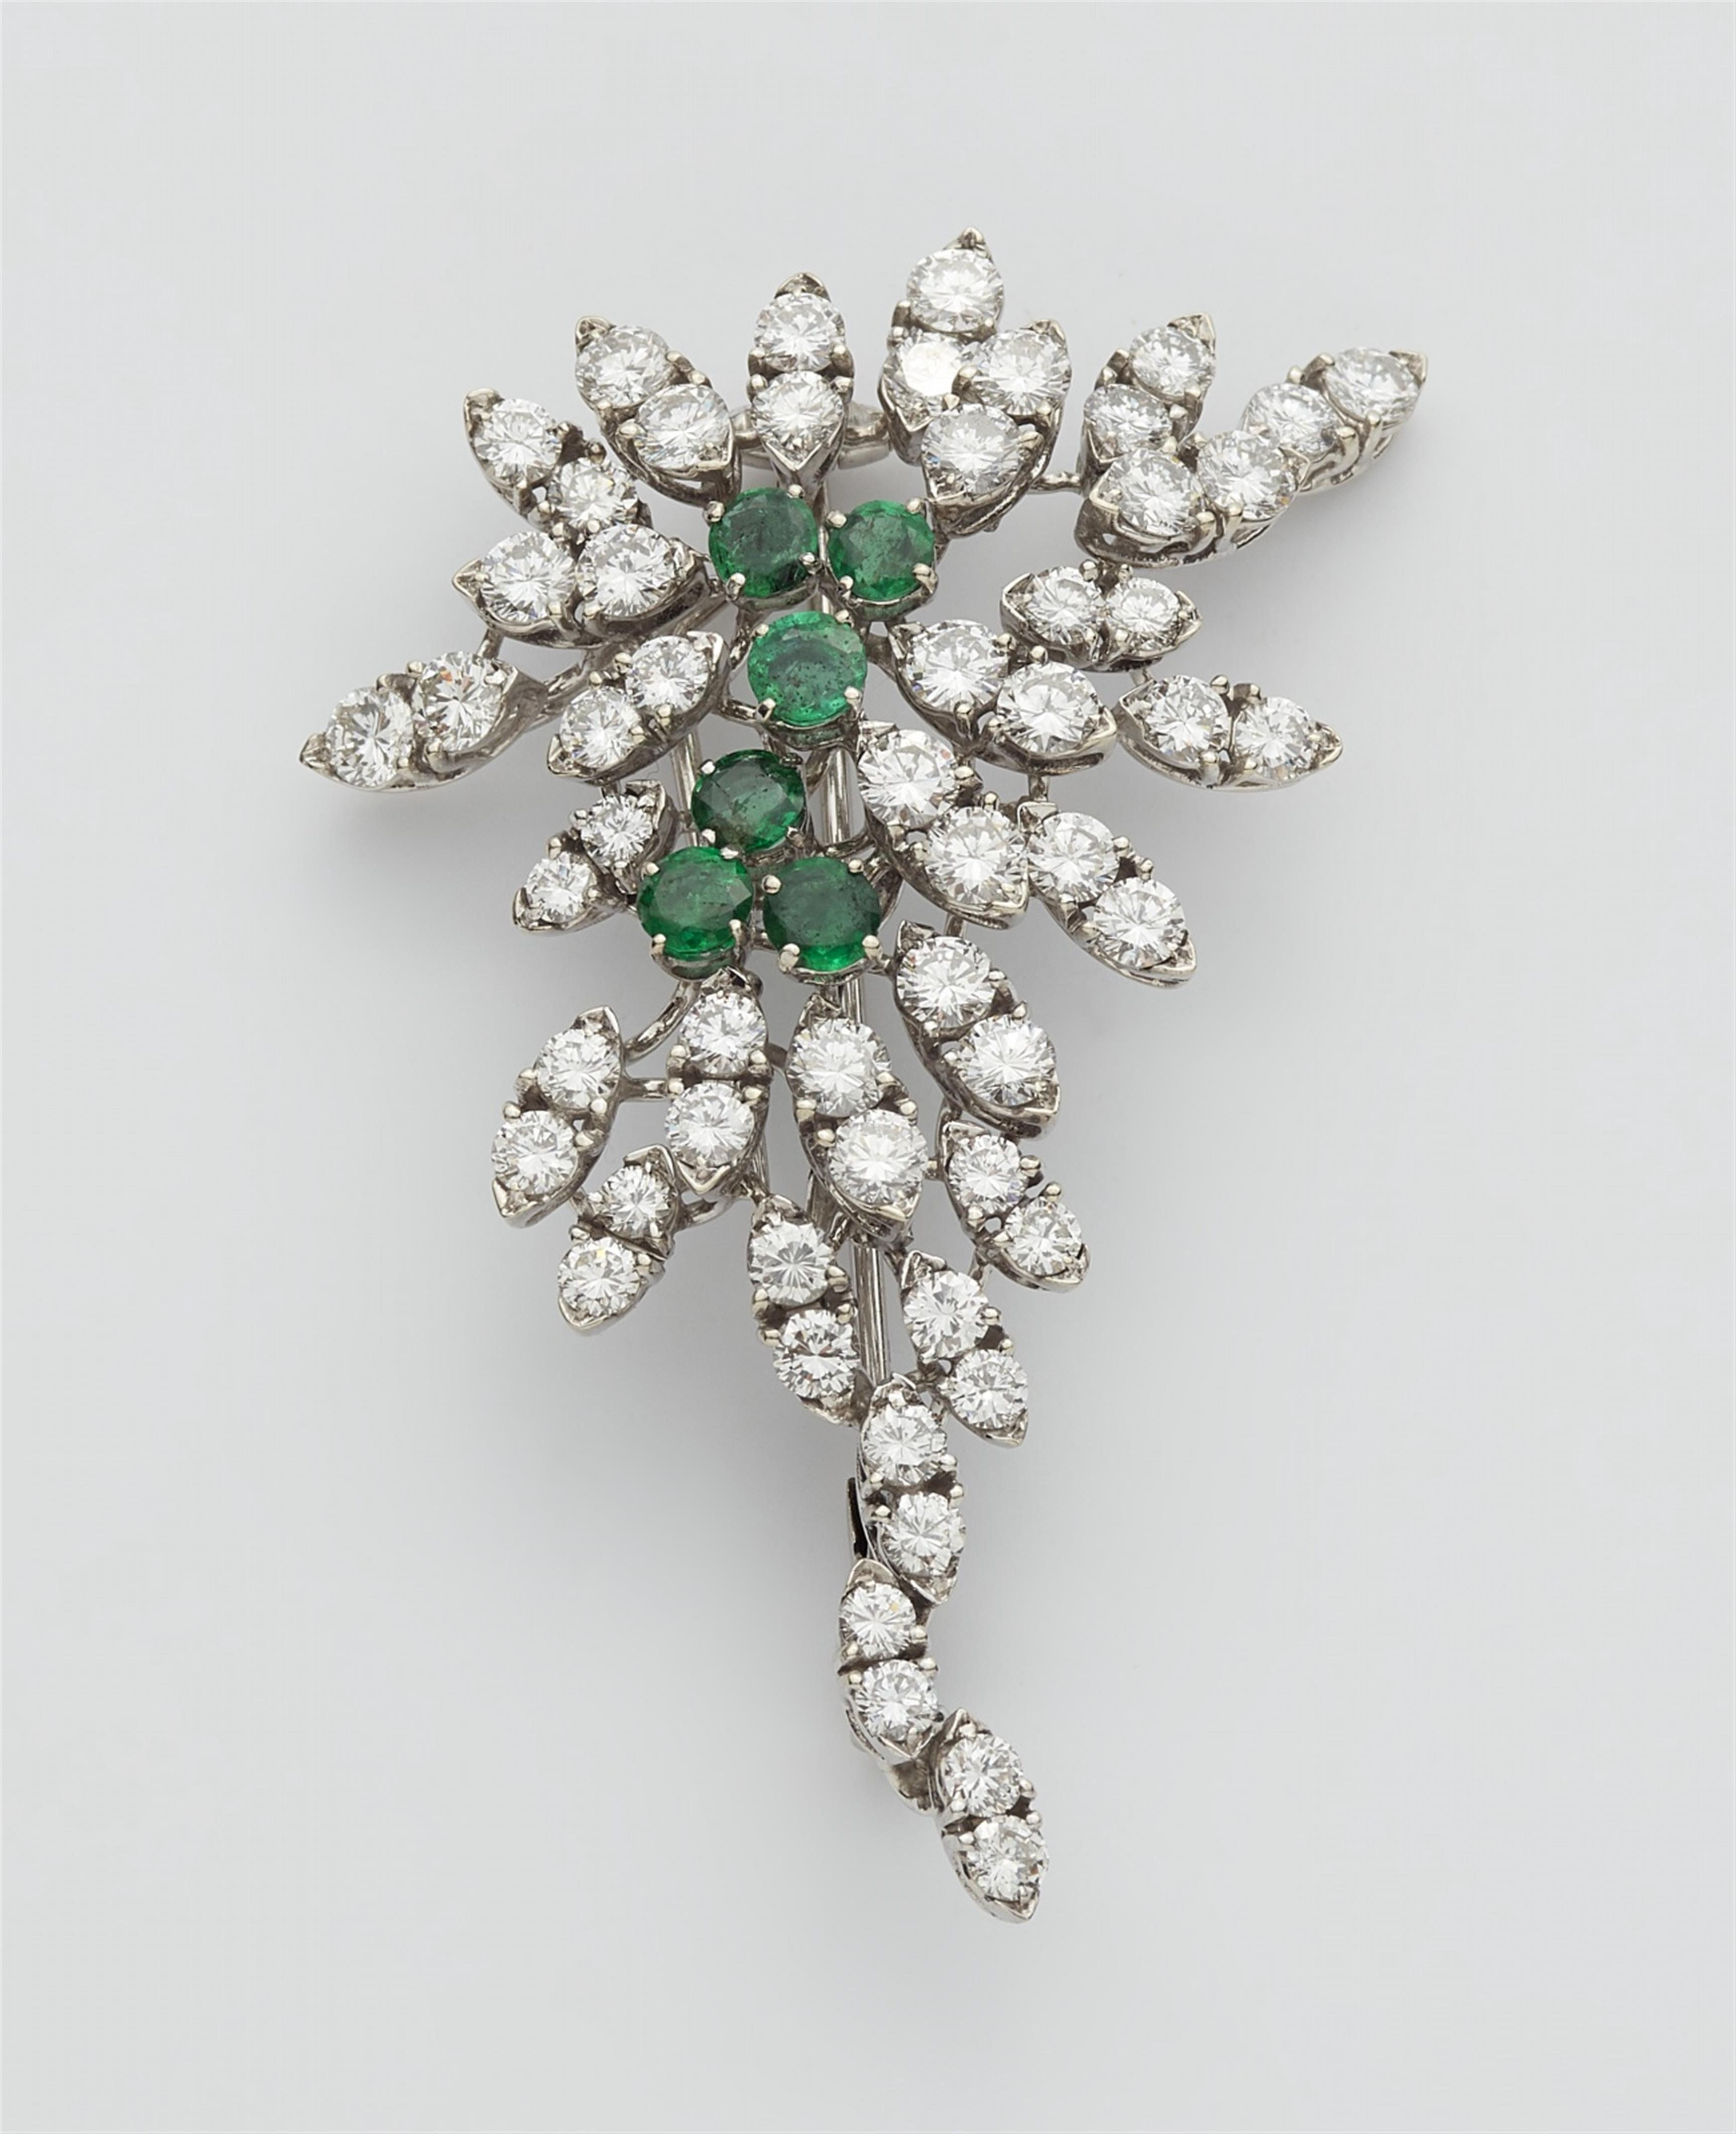 An 18k white gold, diamond, and emerald brooch - image-1